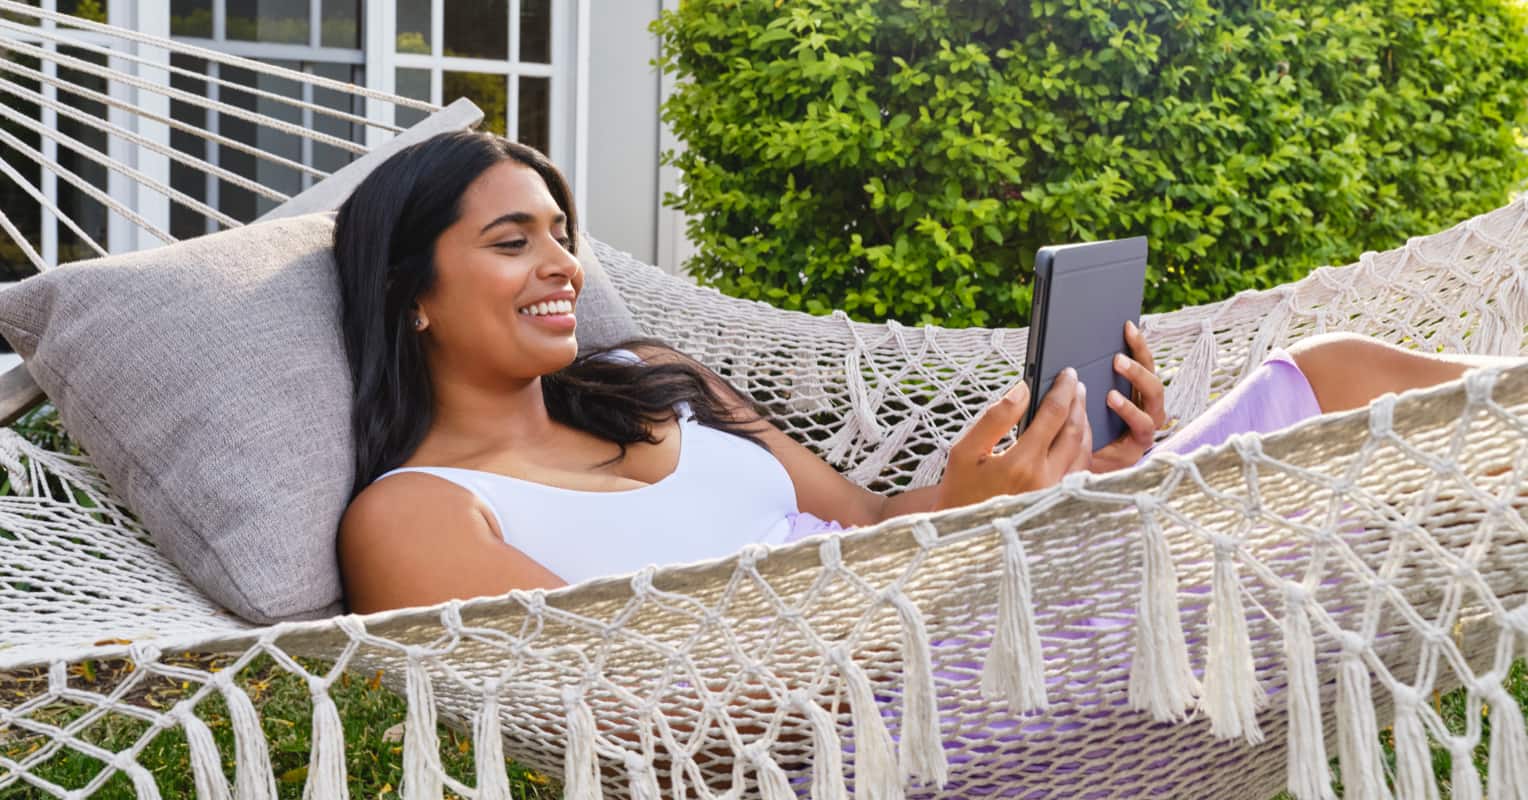 Person sitting in a hammock using a tablet device